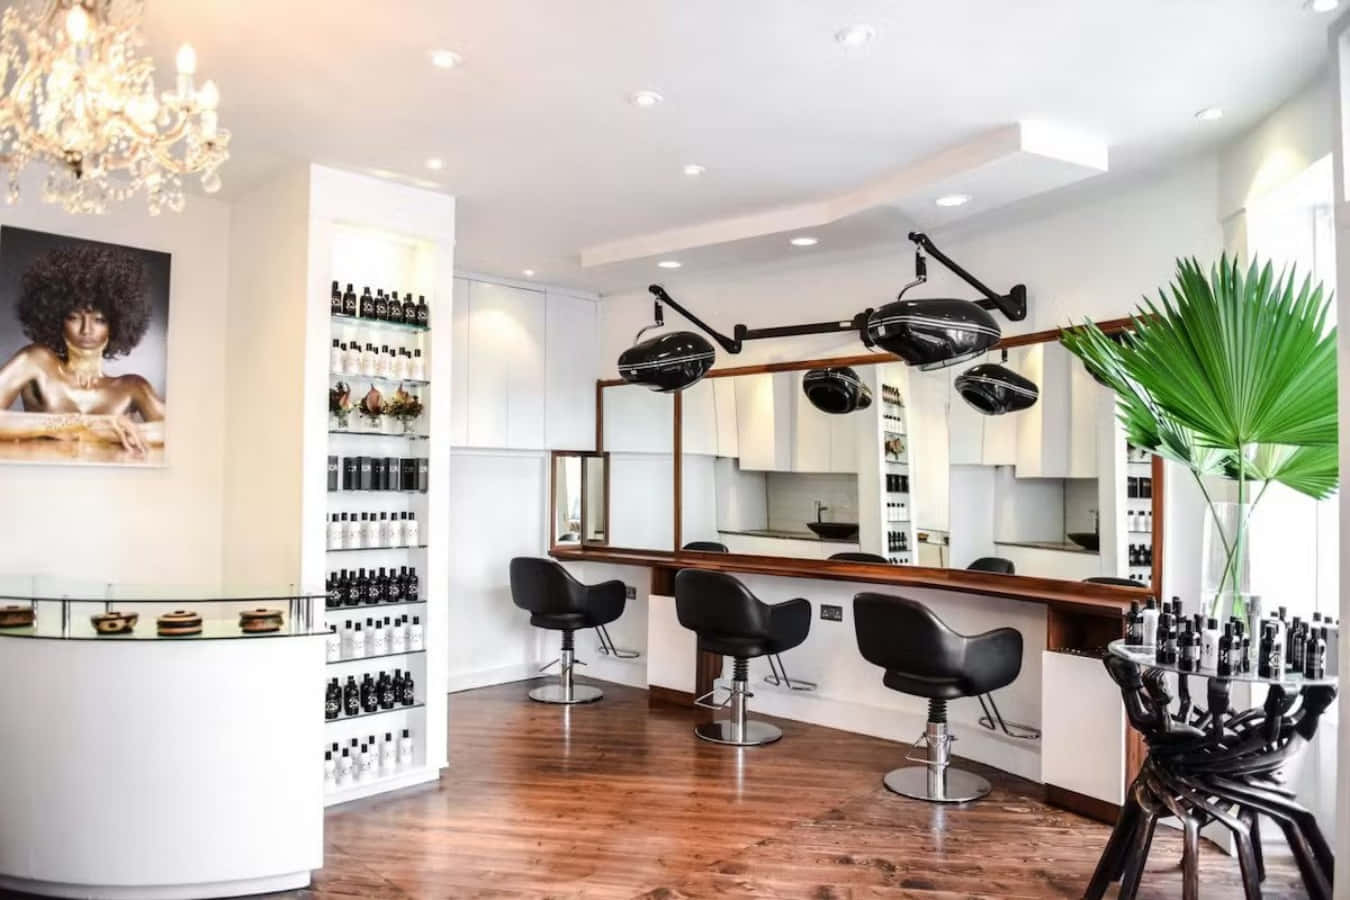 Find the perfect transformation with a visit to the hair salon